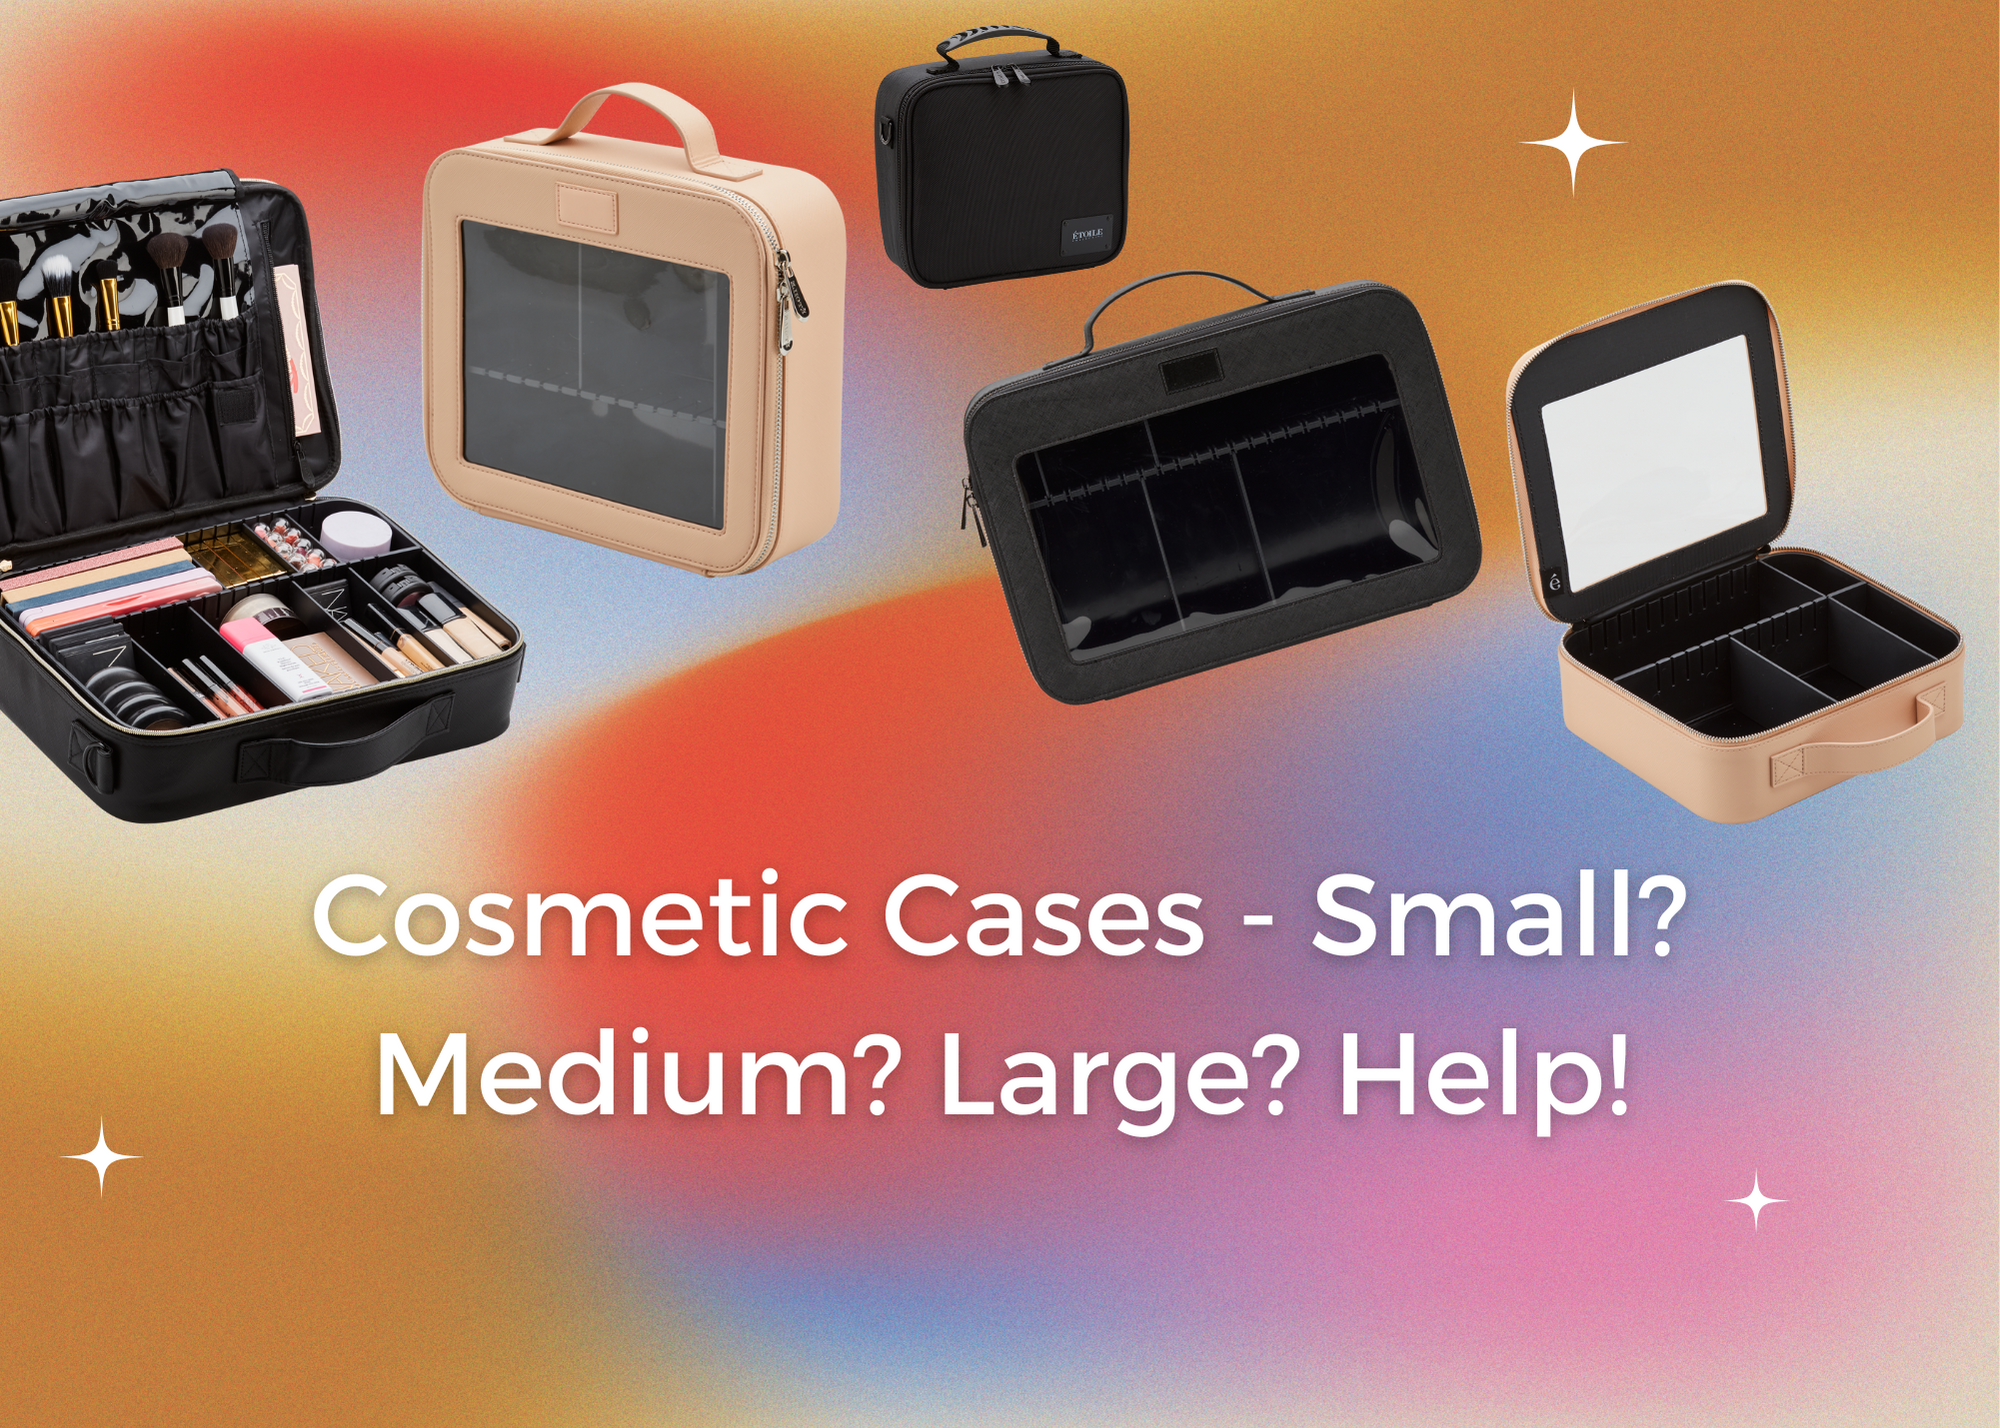 Cosmetic Cases - Small? Medium? Large? Help!